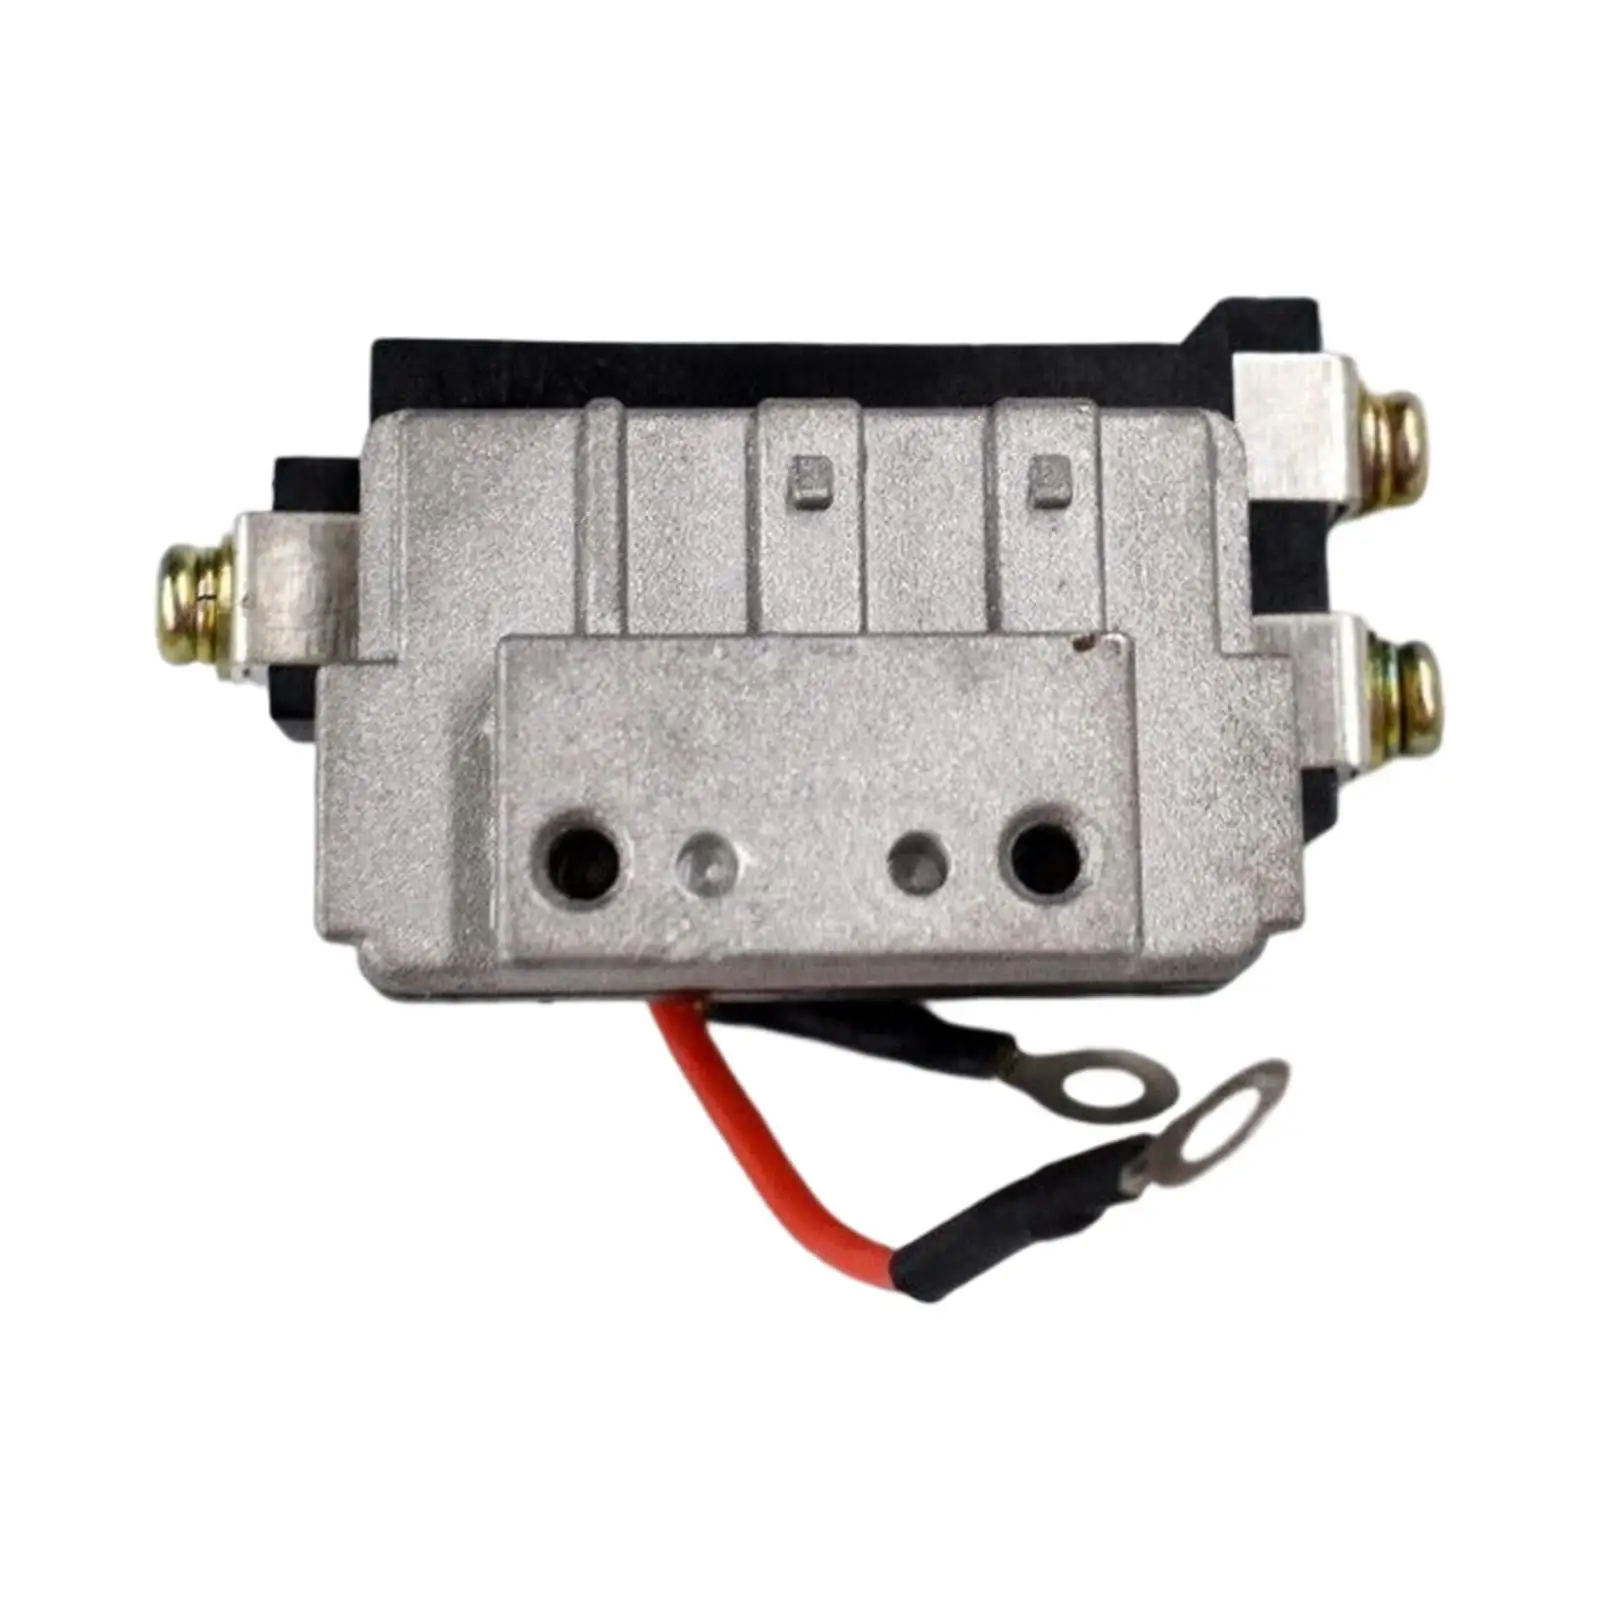 Ignition Control Module Replacement Accessories for Toyota Corolla